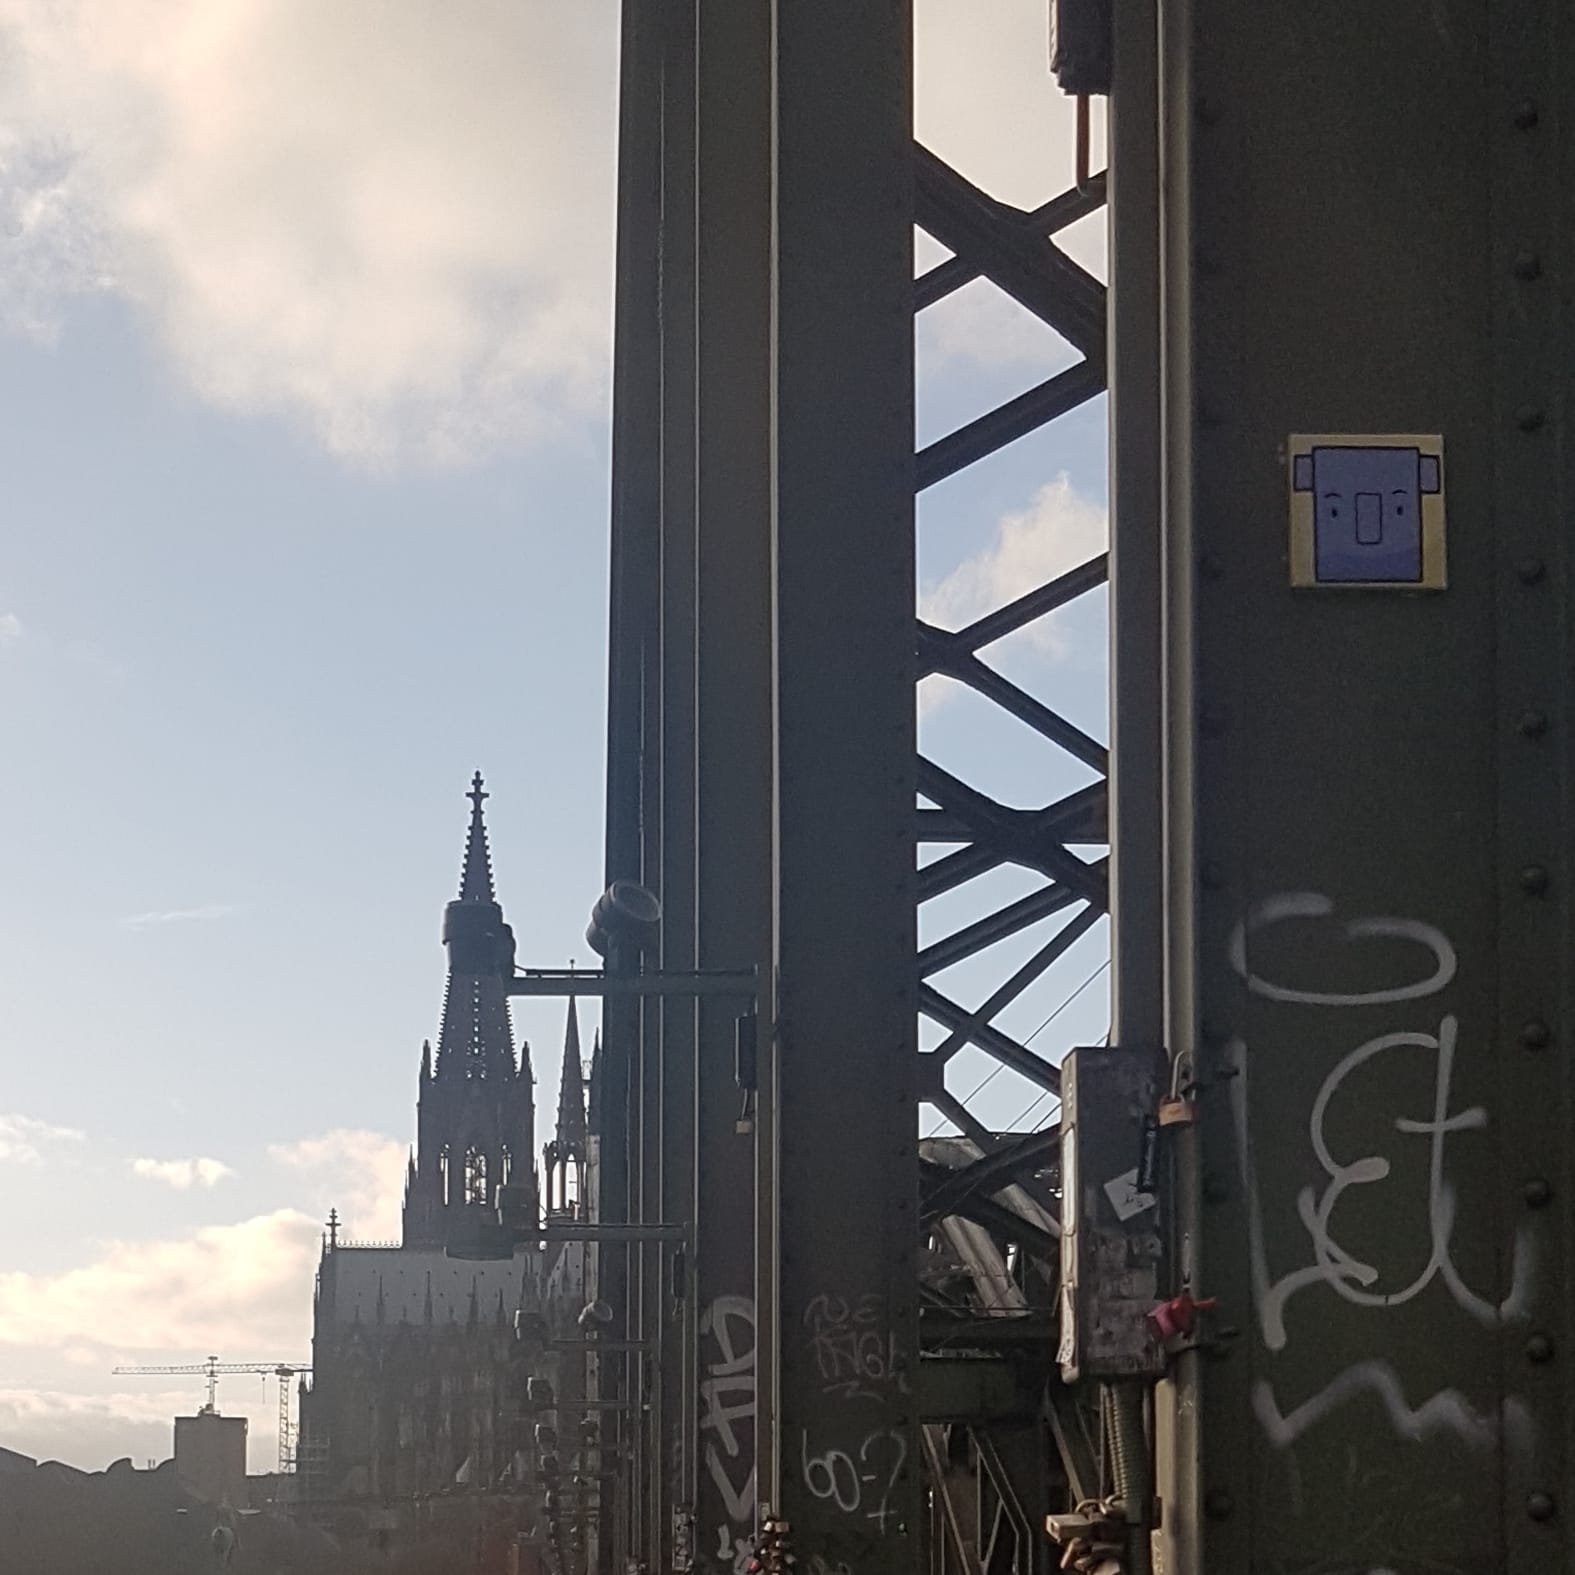 Sticking 3803 Welcome to cologne by the artist ROKA in Cologne Germany